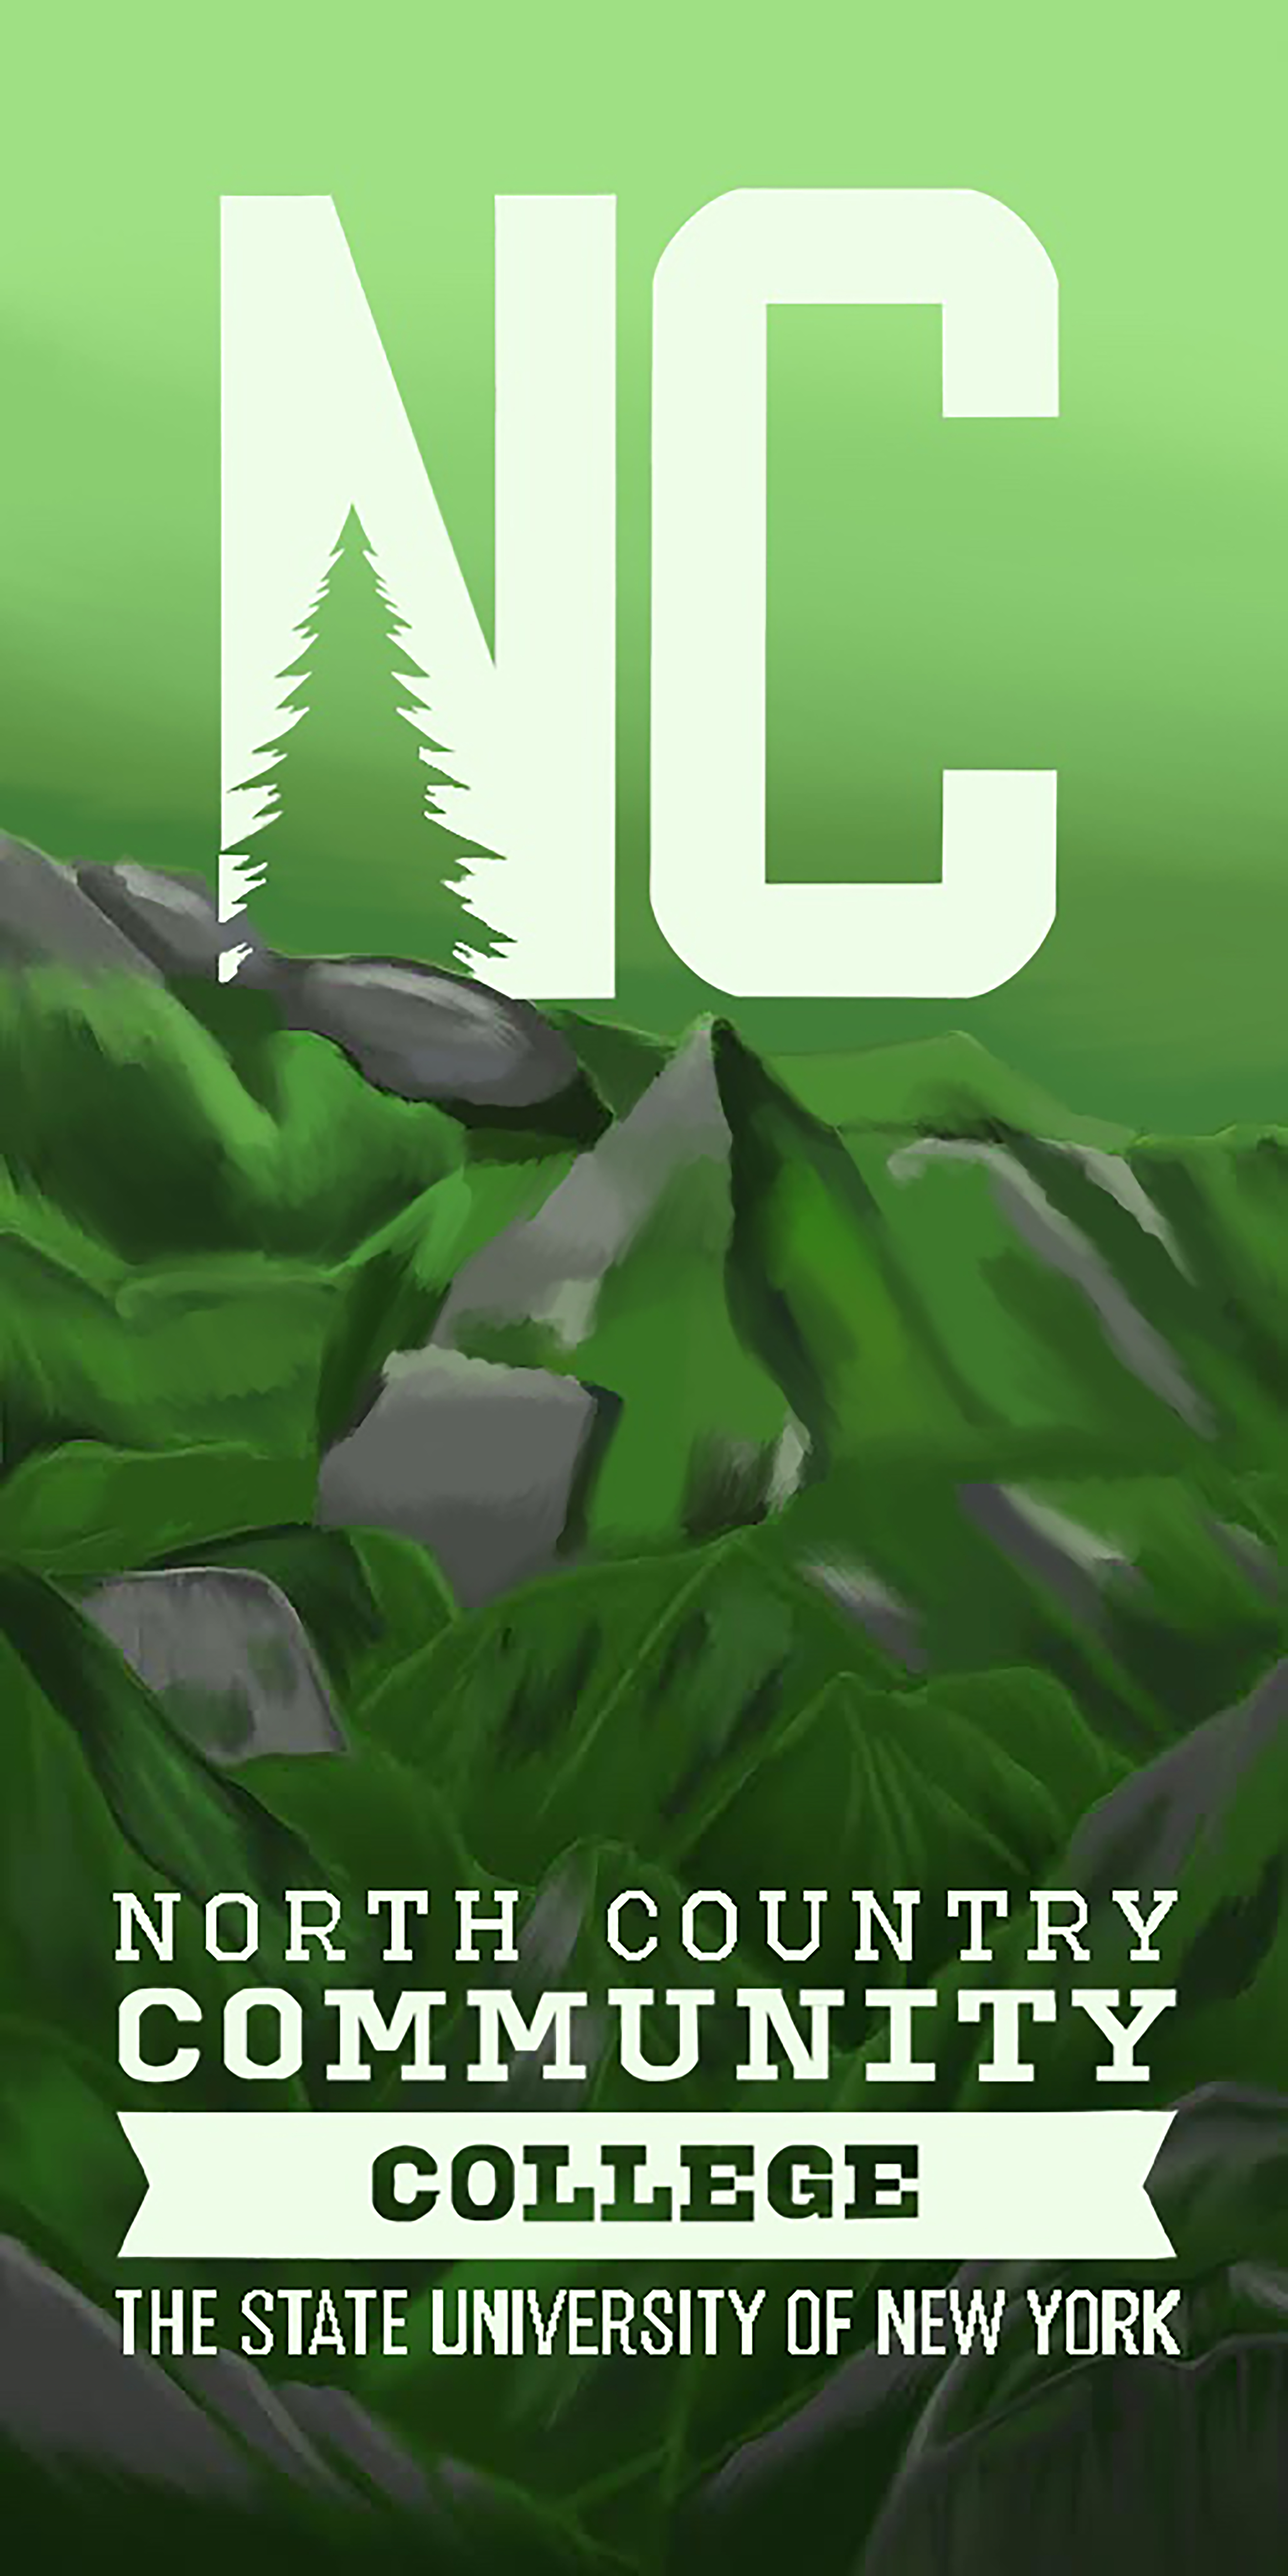 A banner showing the college's logo in green and white with abstract mountains at the bottom